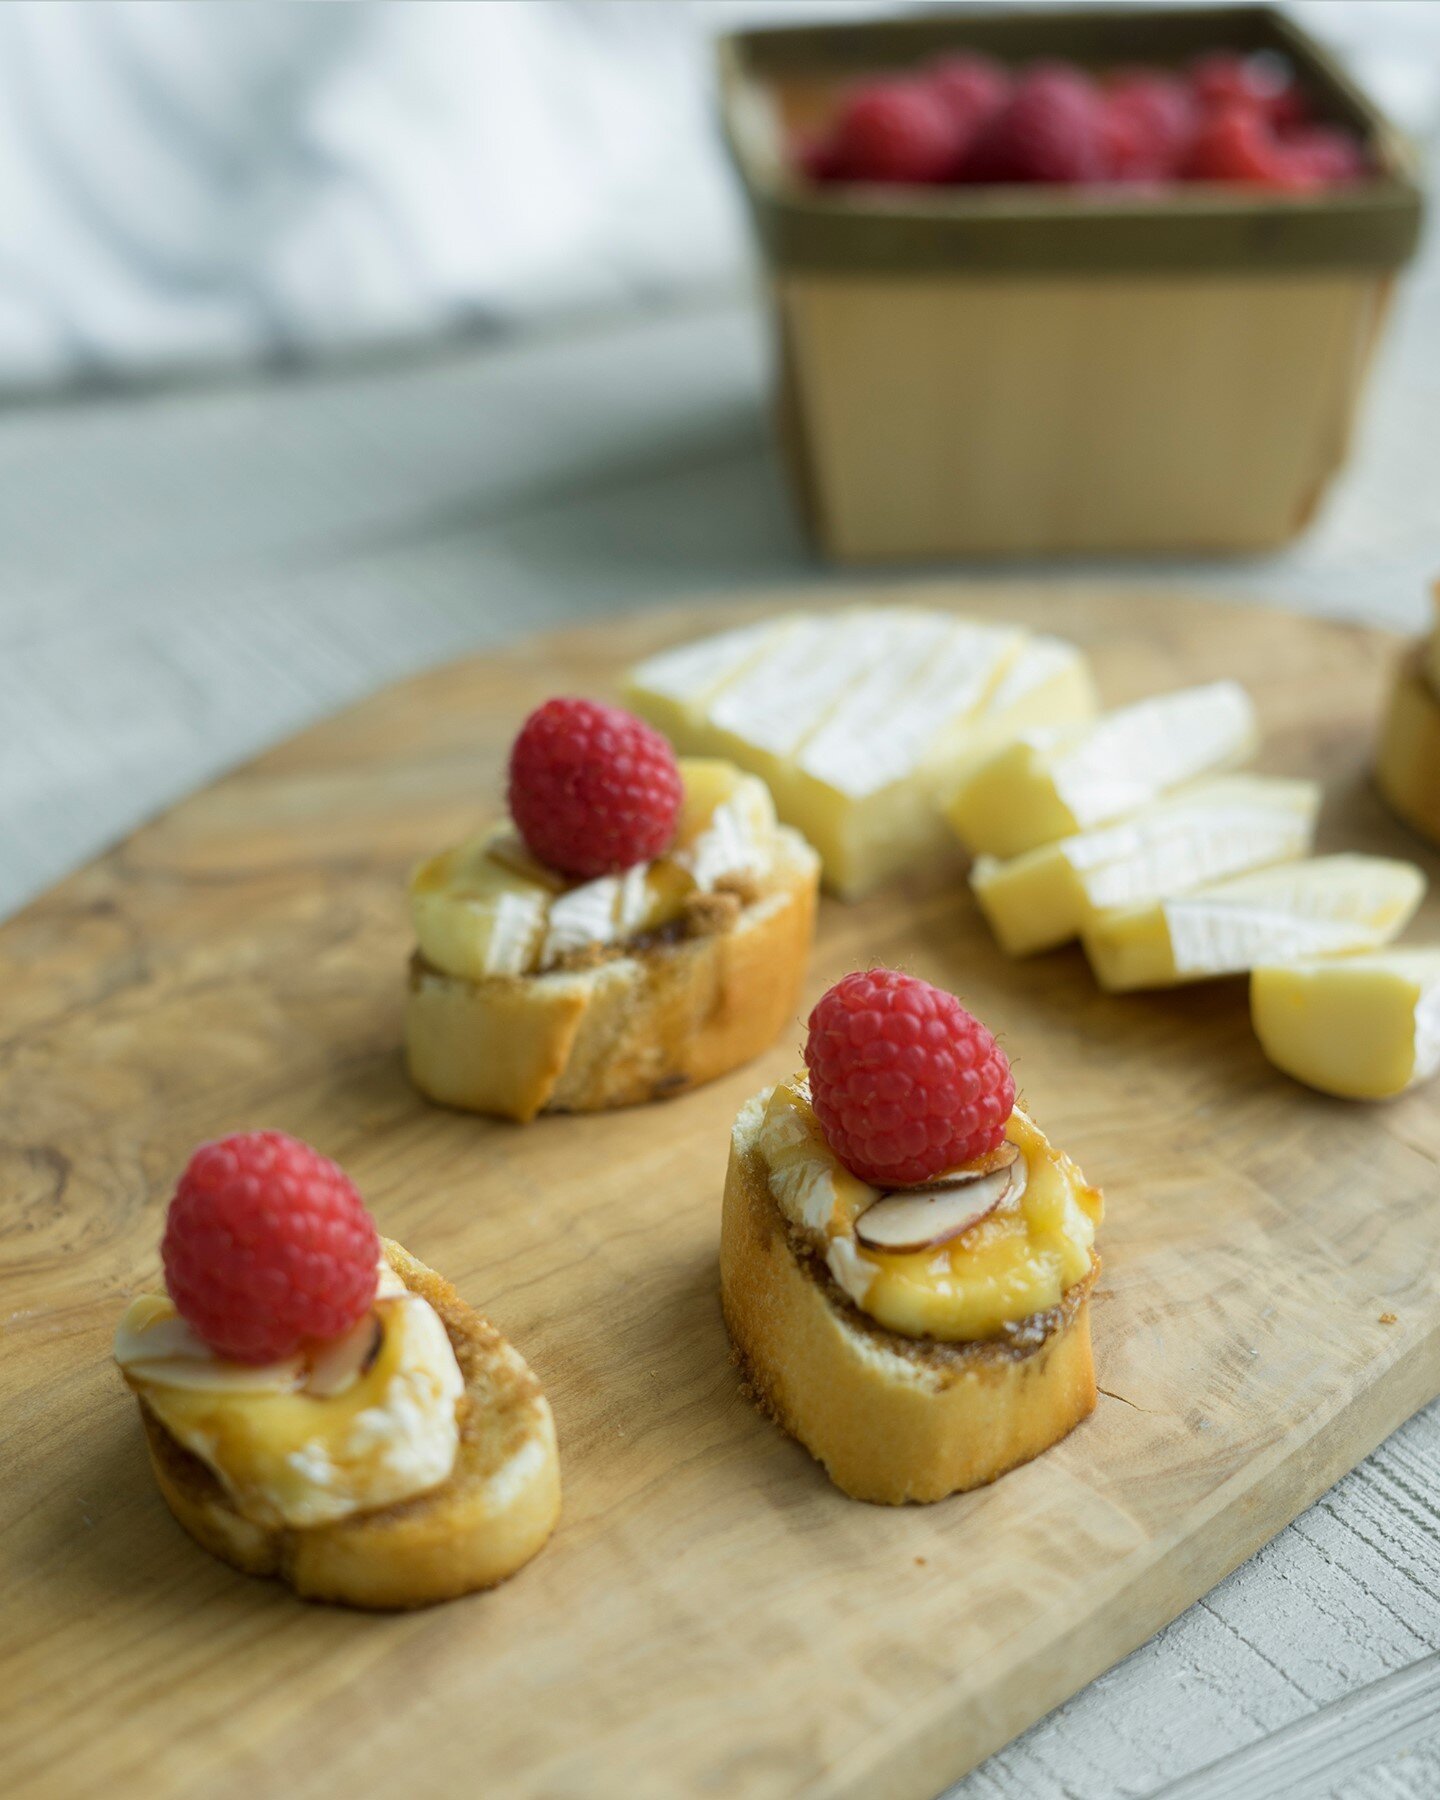 Raspberries and honey transform Briette Creamy &amp; Mild  cheese into the perfect bite-sized dessert. Layer them on sliced baguette and toast them in the oven for an easy-yet-elegant weekend treat. ⁠
⁠